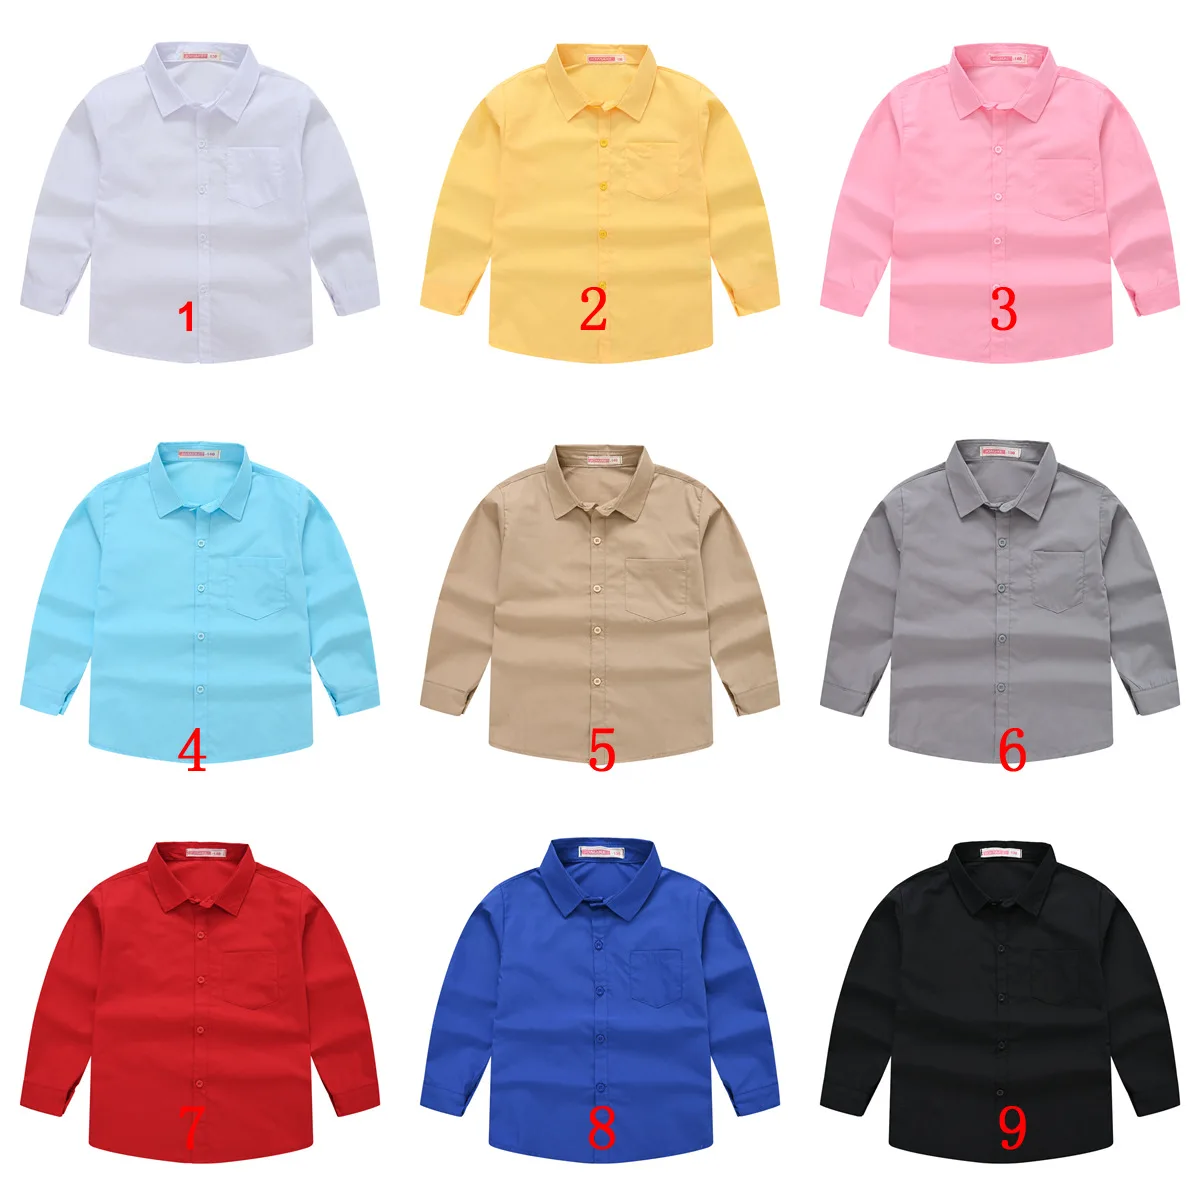 

Kids' Shirts Spring Fall This year's hot shirts for boys and girls Solid color long sleeve tops for students/preppy Style 4-12